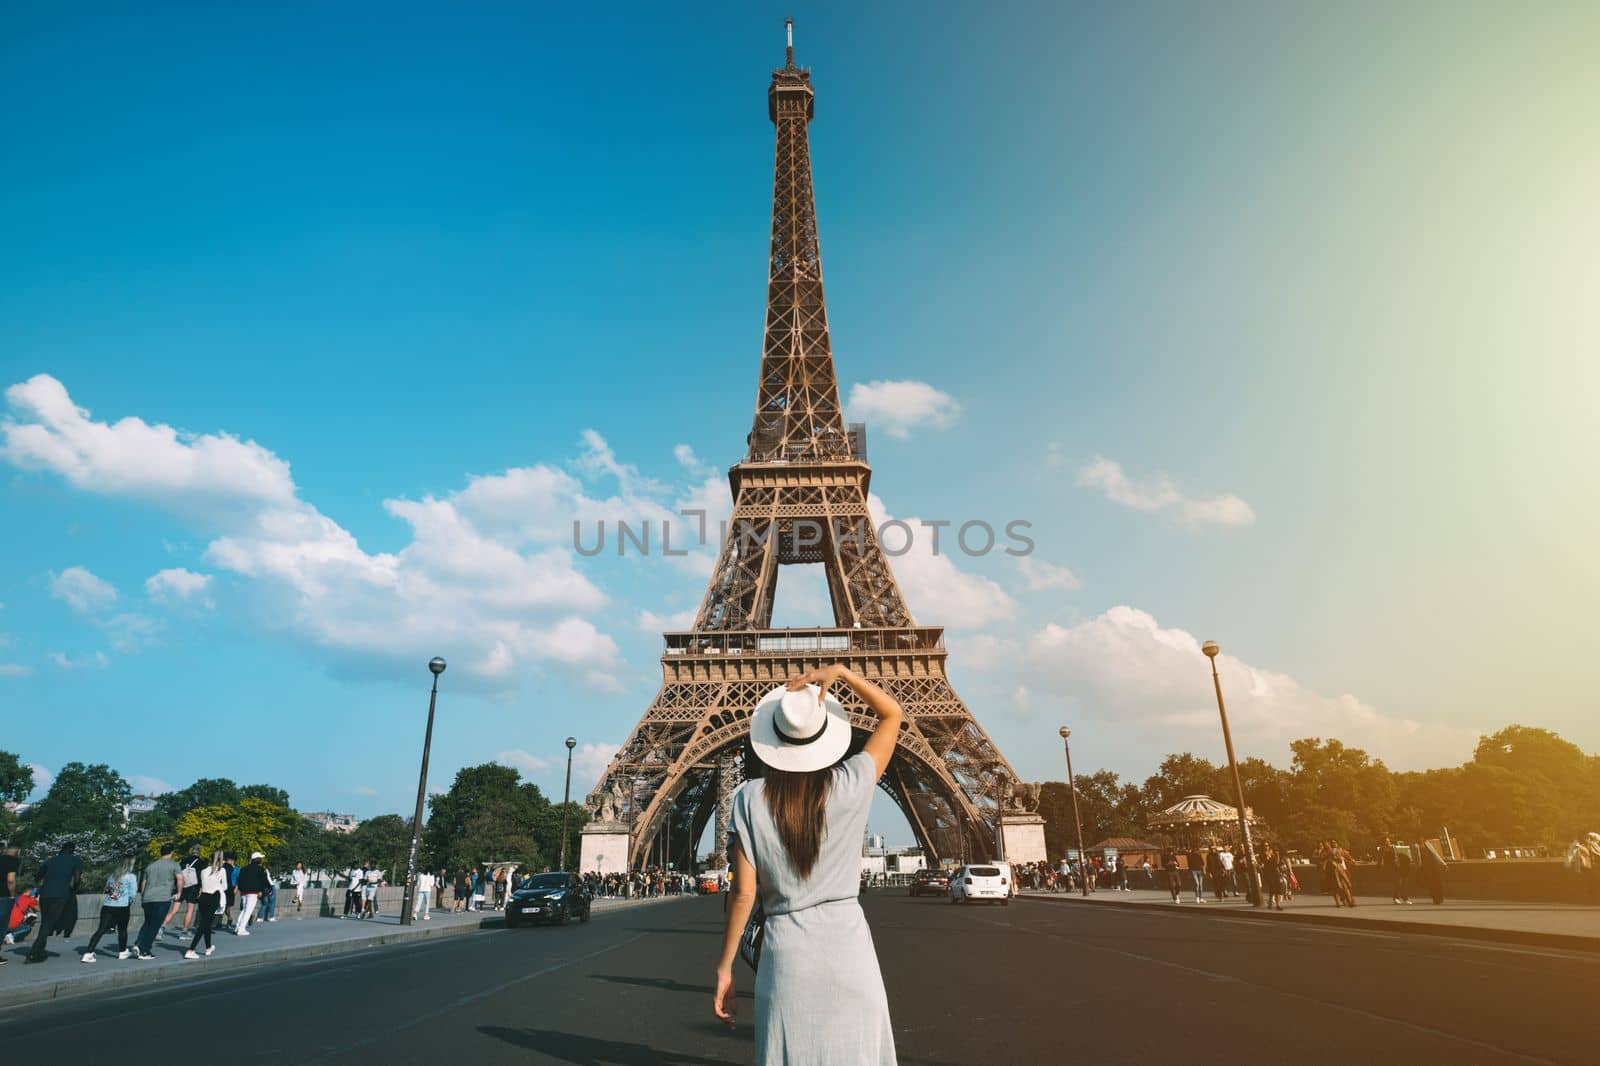 Rear view of woman tourist in sun hat standing in front of Eiffel Tower in Paris. Travel in France, tourism concept. Holiday or vacation in Paris by DariaKulkova